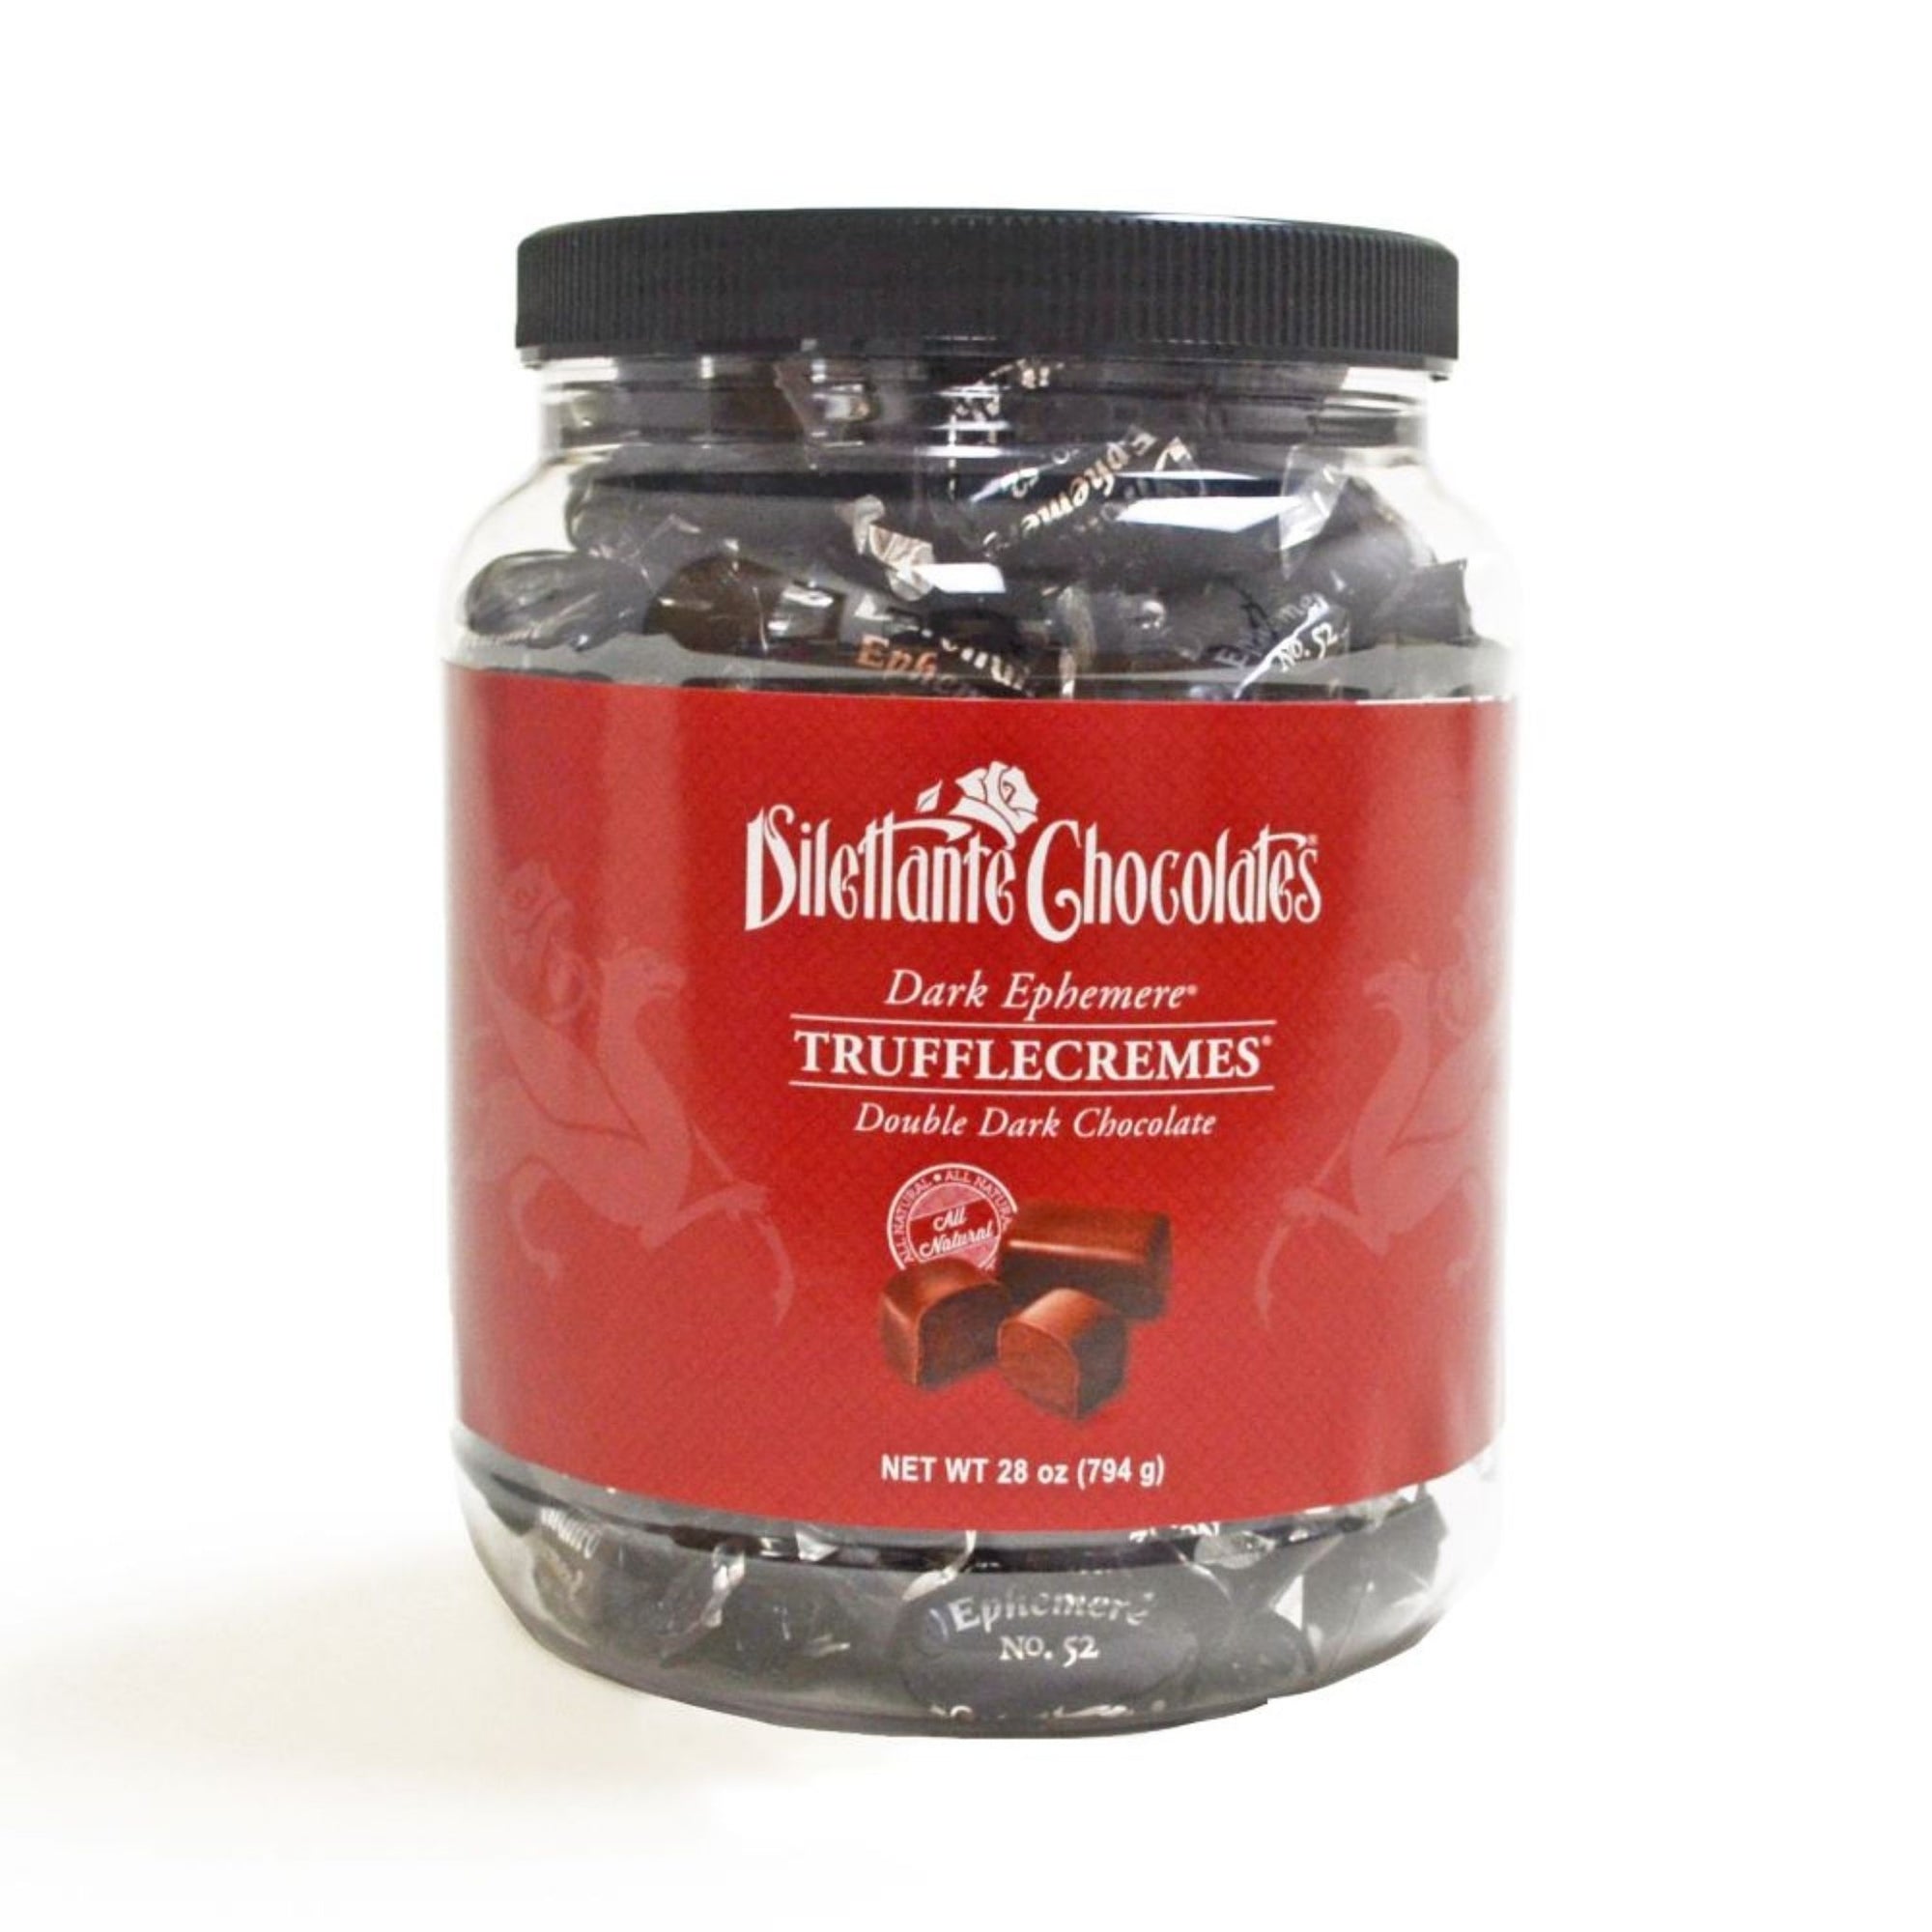 Dilettante Chocolates Dark Ephemere TruffleCremes Coasted in Double Dark Chocolate and Made with All Natural Ingredients